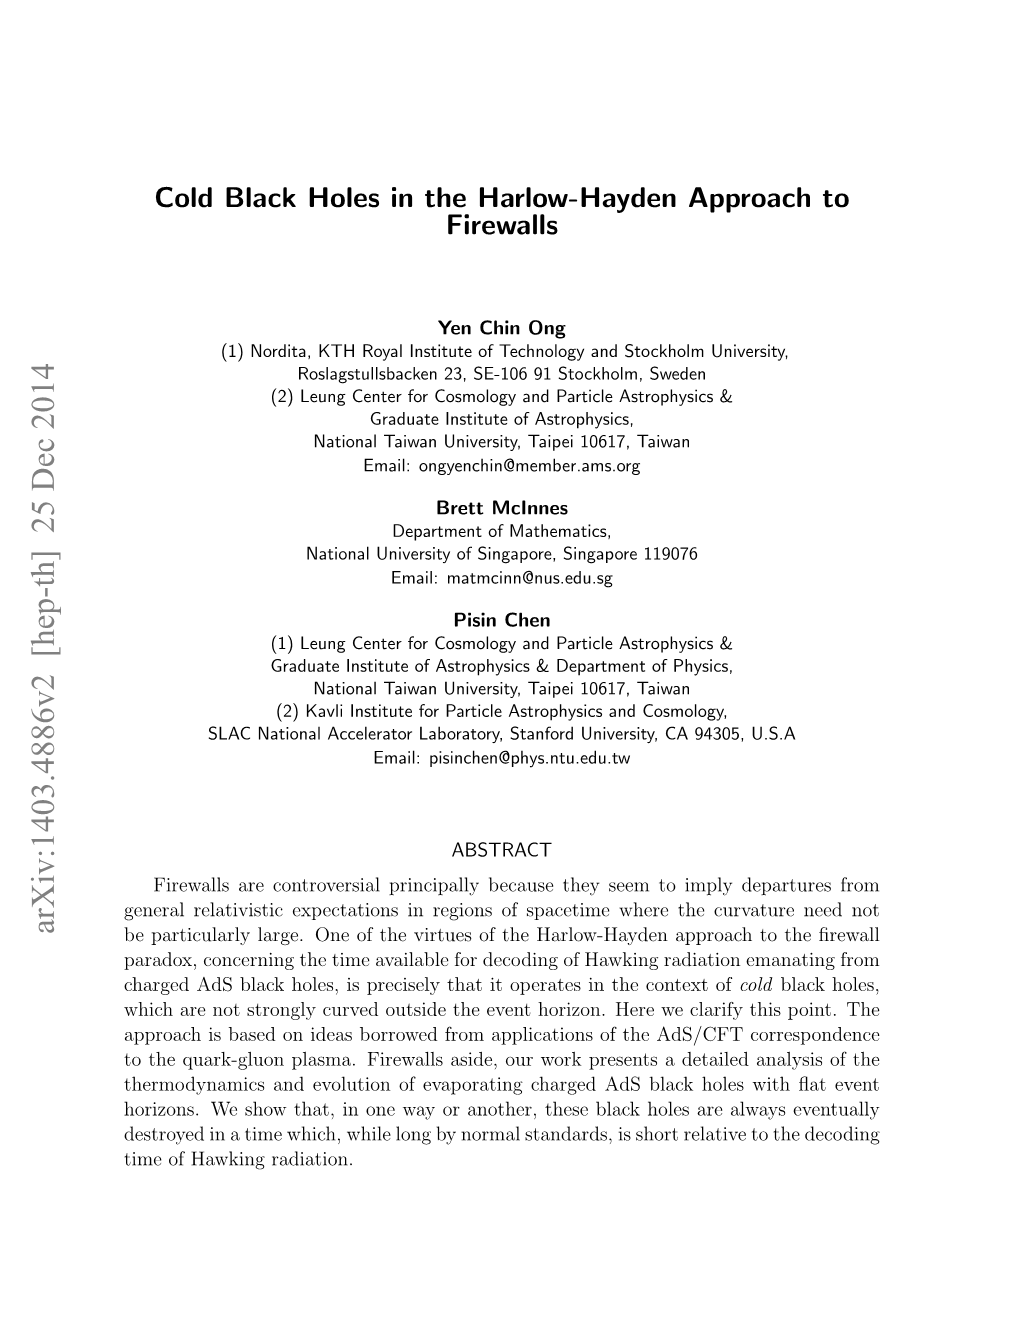 Cold Black Holes in the Harlow-Hayden Approach to Firewalls